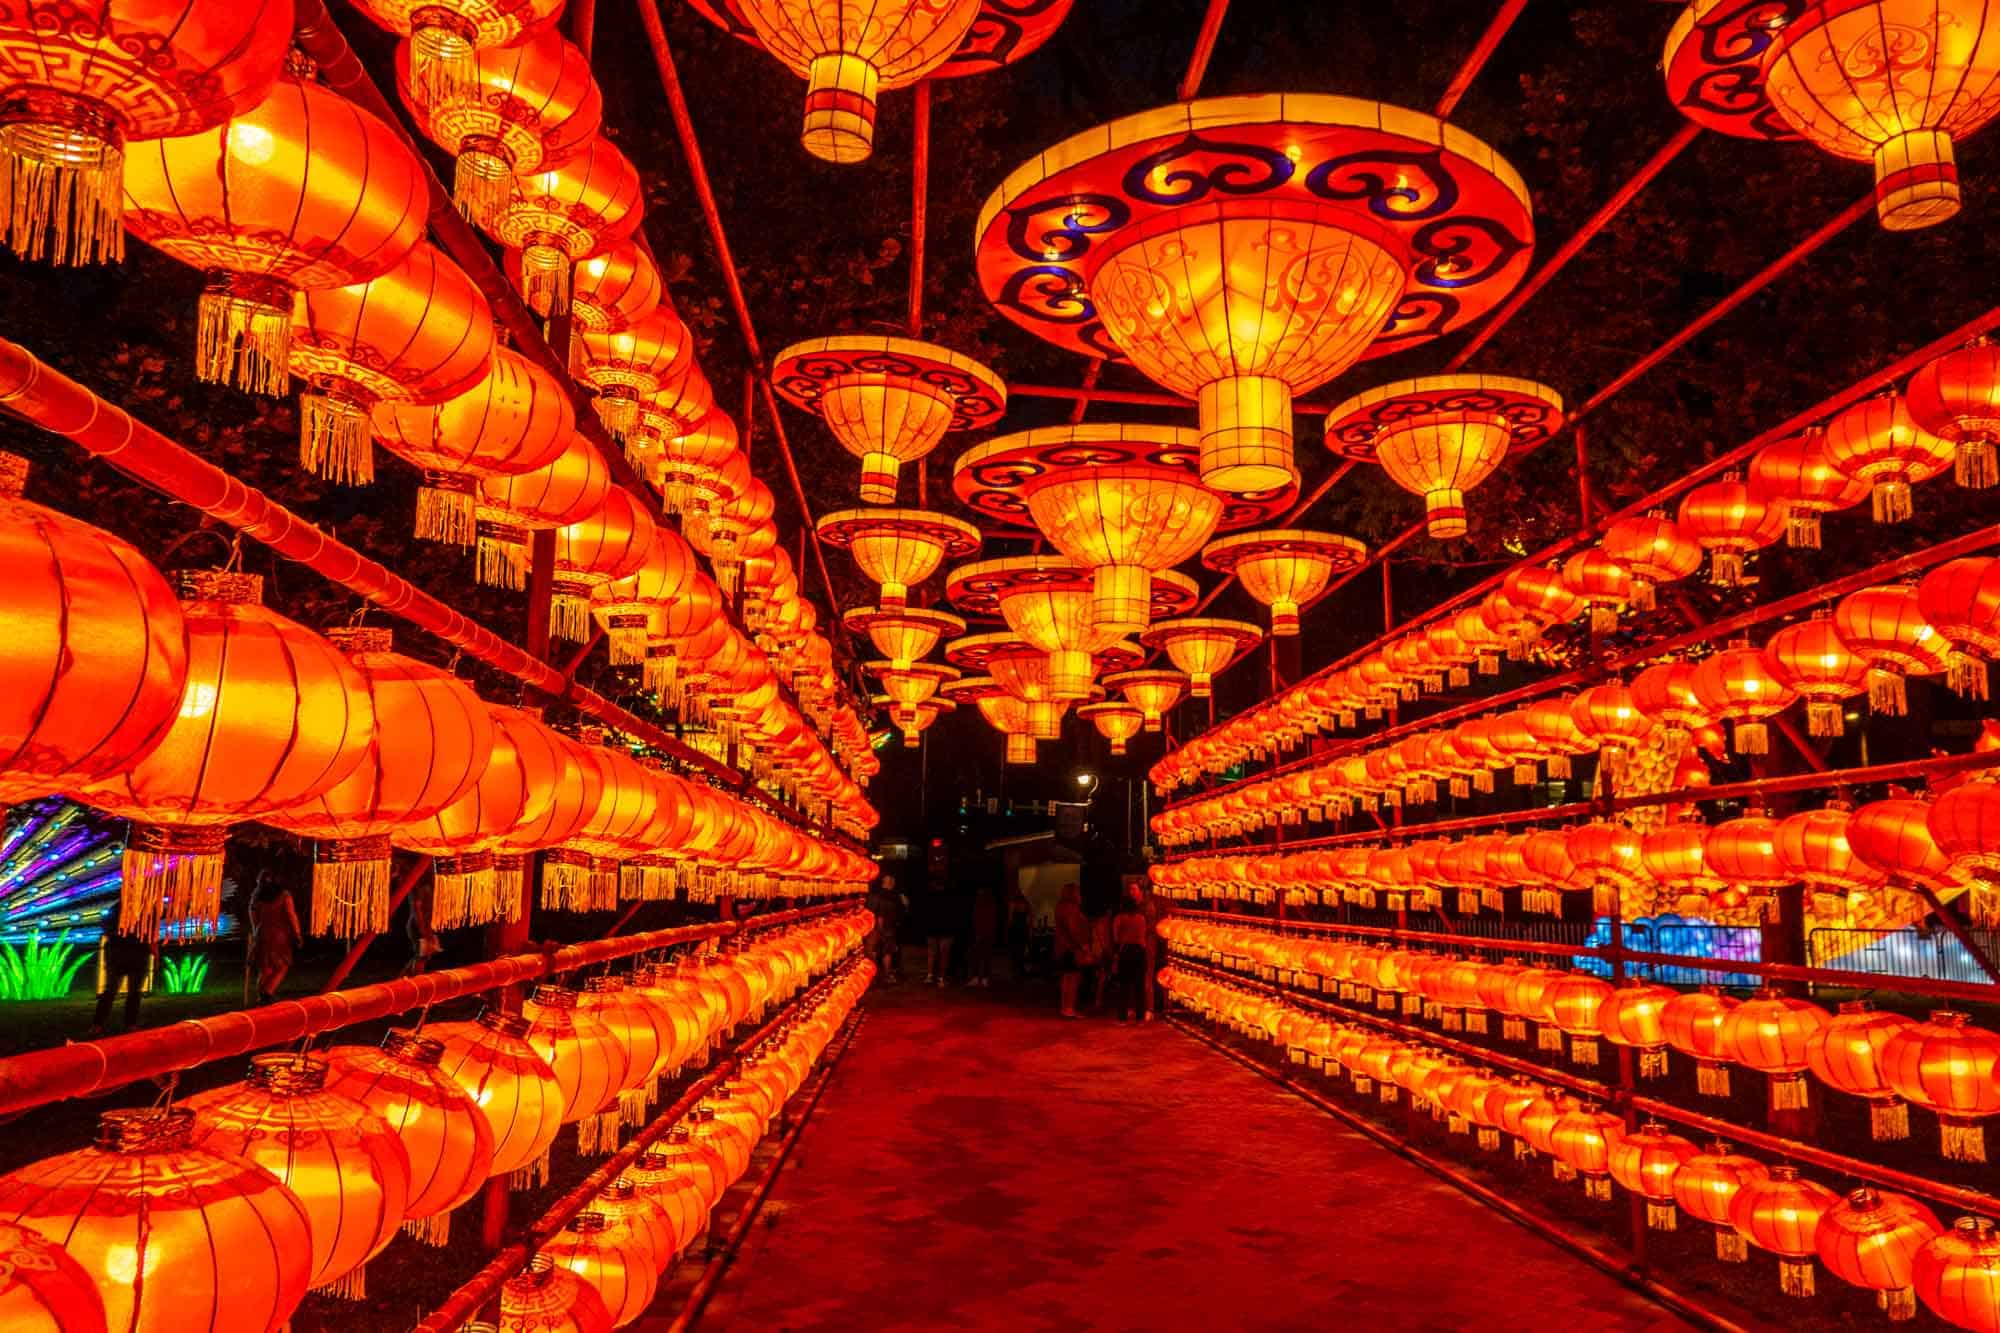 A tunnel made of red Chinese lanterns lit up at night